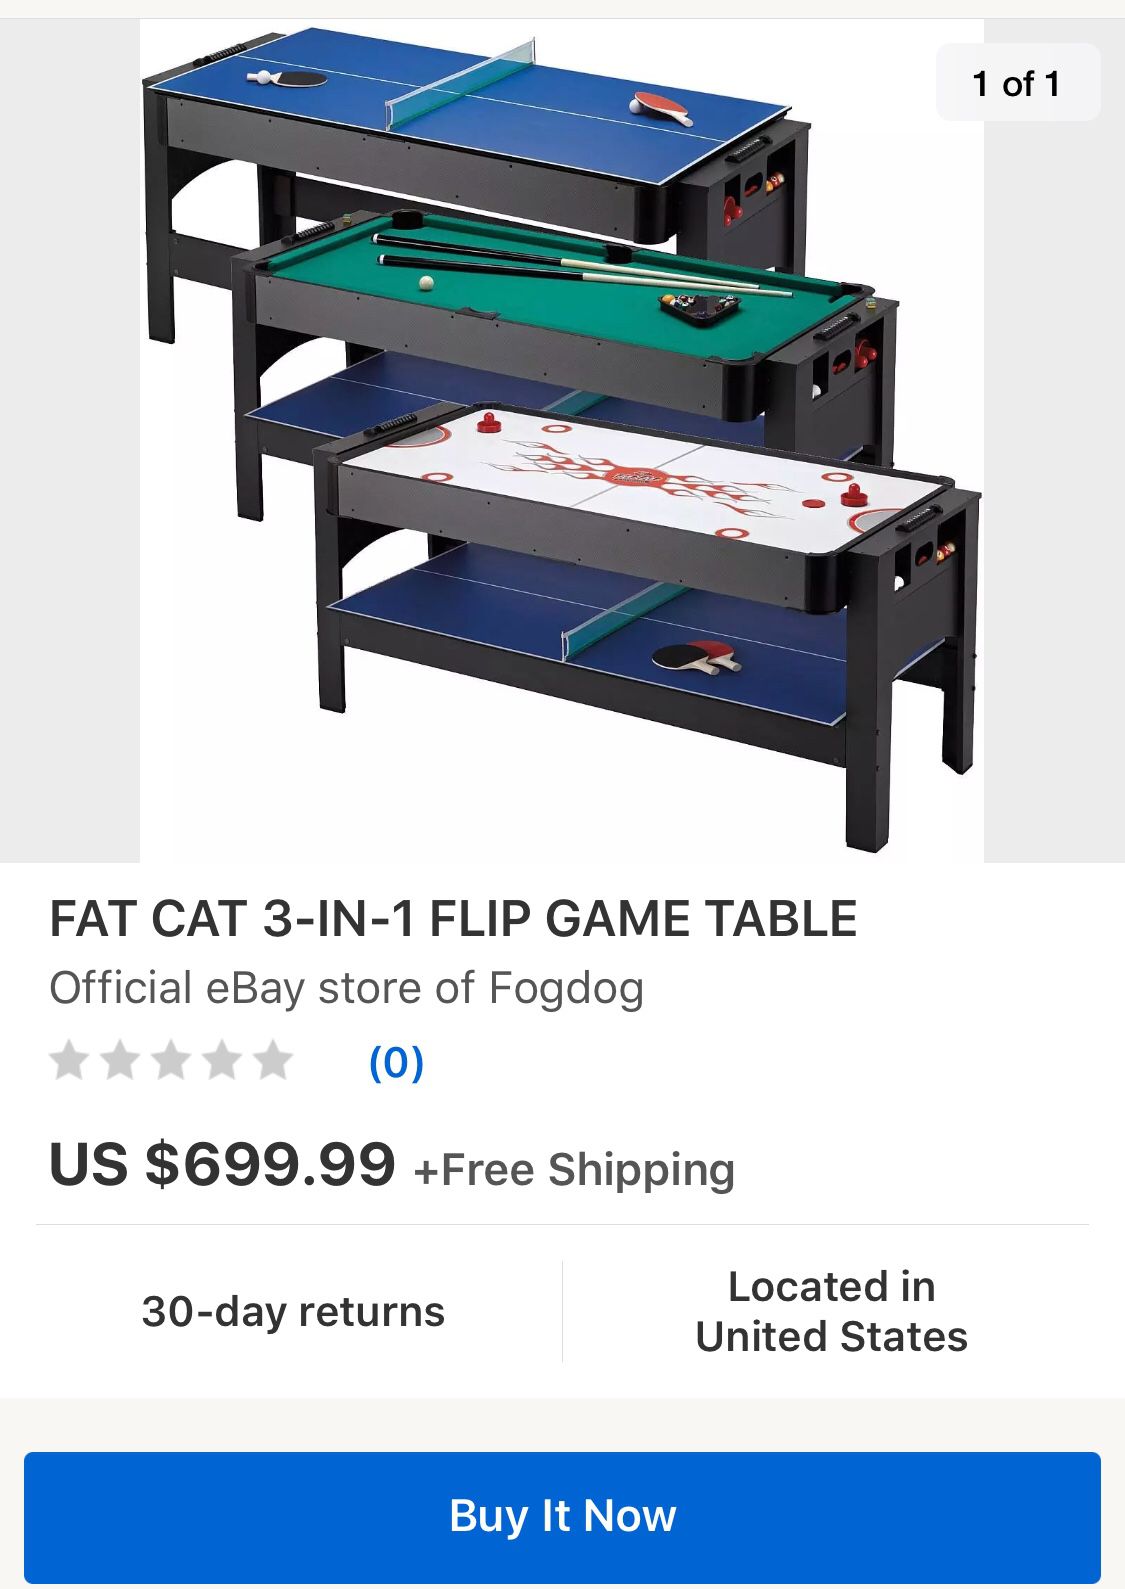 Fat cat 3 in 1 game table “brand new”